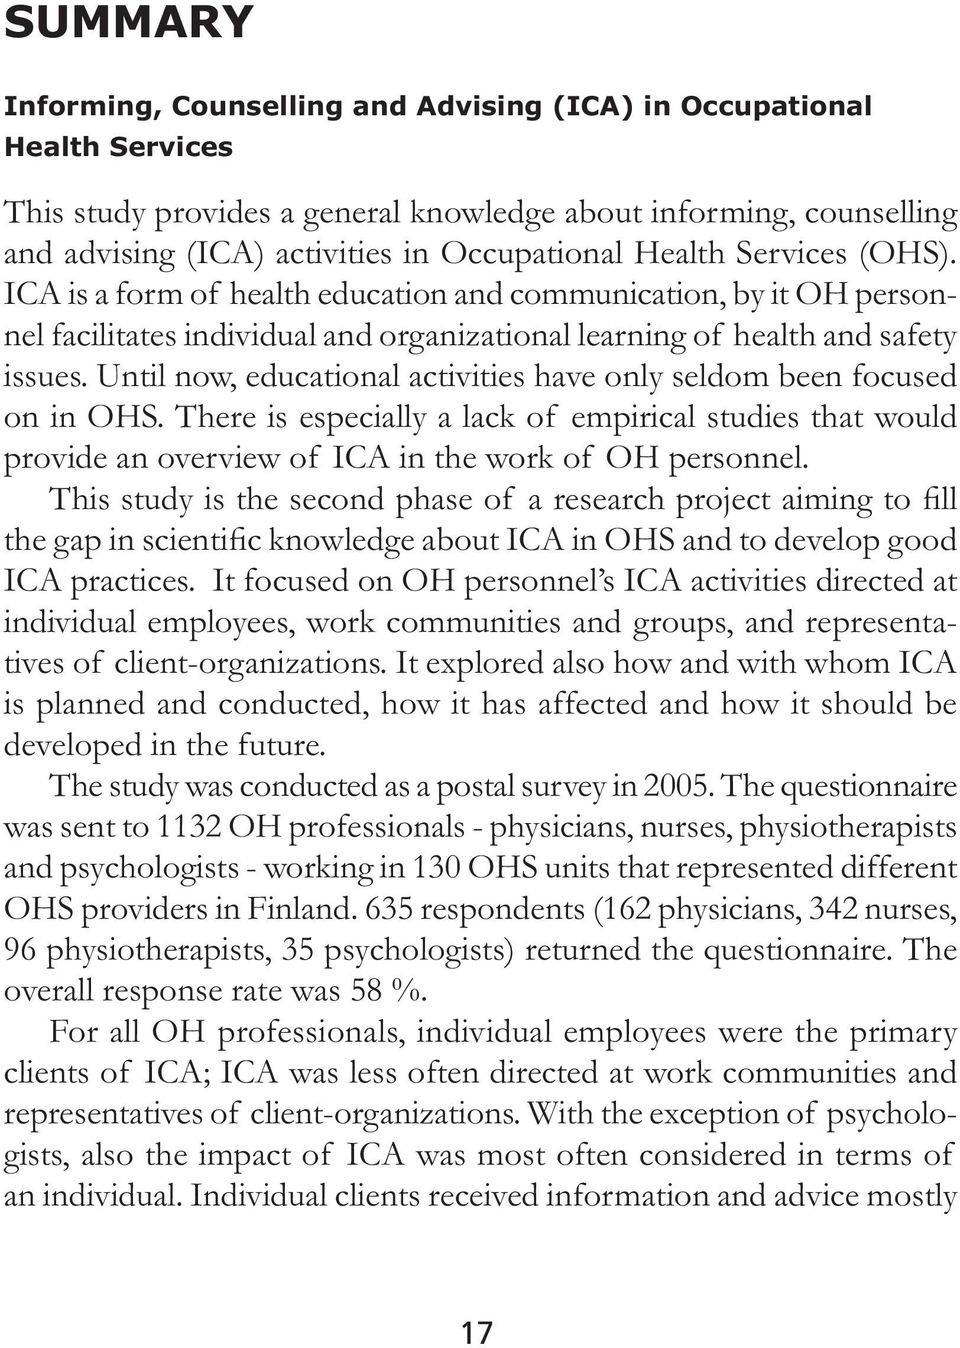 Until now, educational activities have only seldom been focused on in OHS. There is especially a lack of empirical studies that would provide an overview of ICA in the work of OH personnel.